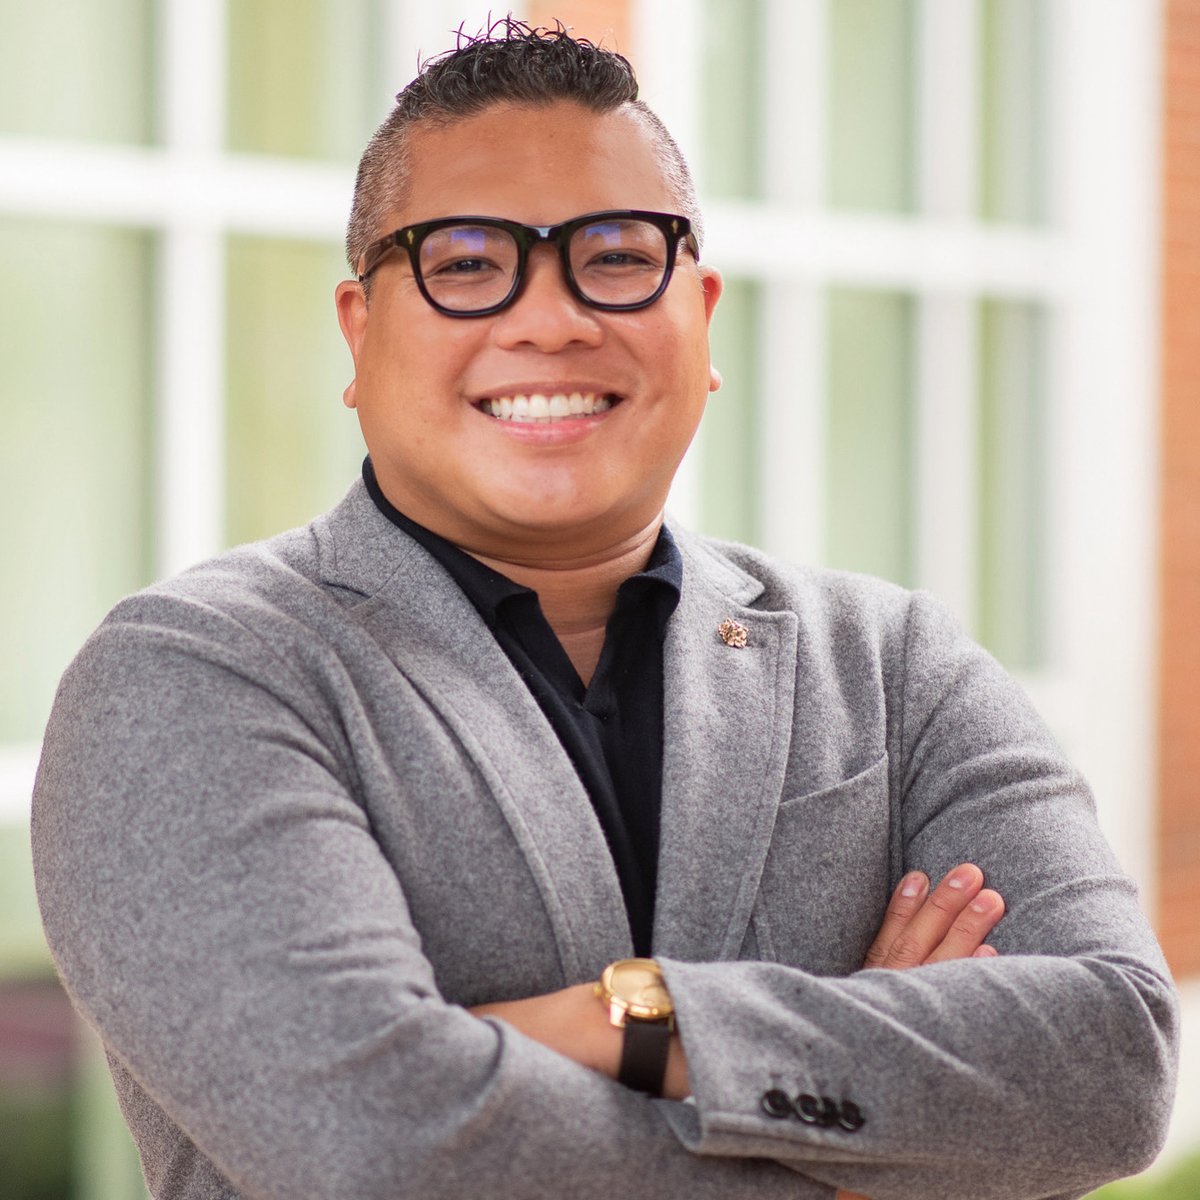 We are proud to share that our own Data and Performance Practice Manager, Rudy de Leon Dinglas, has been re-elected into the Board of Trustees for #NECoPA - Northeast Conference on Public Administration. Congrats @iamRudes !